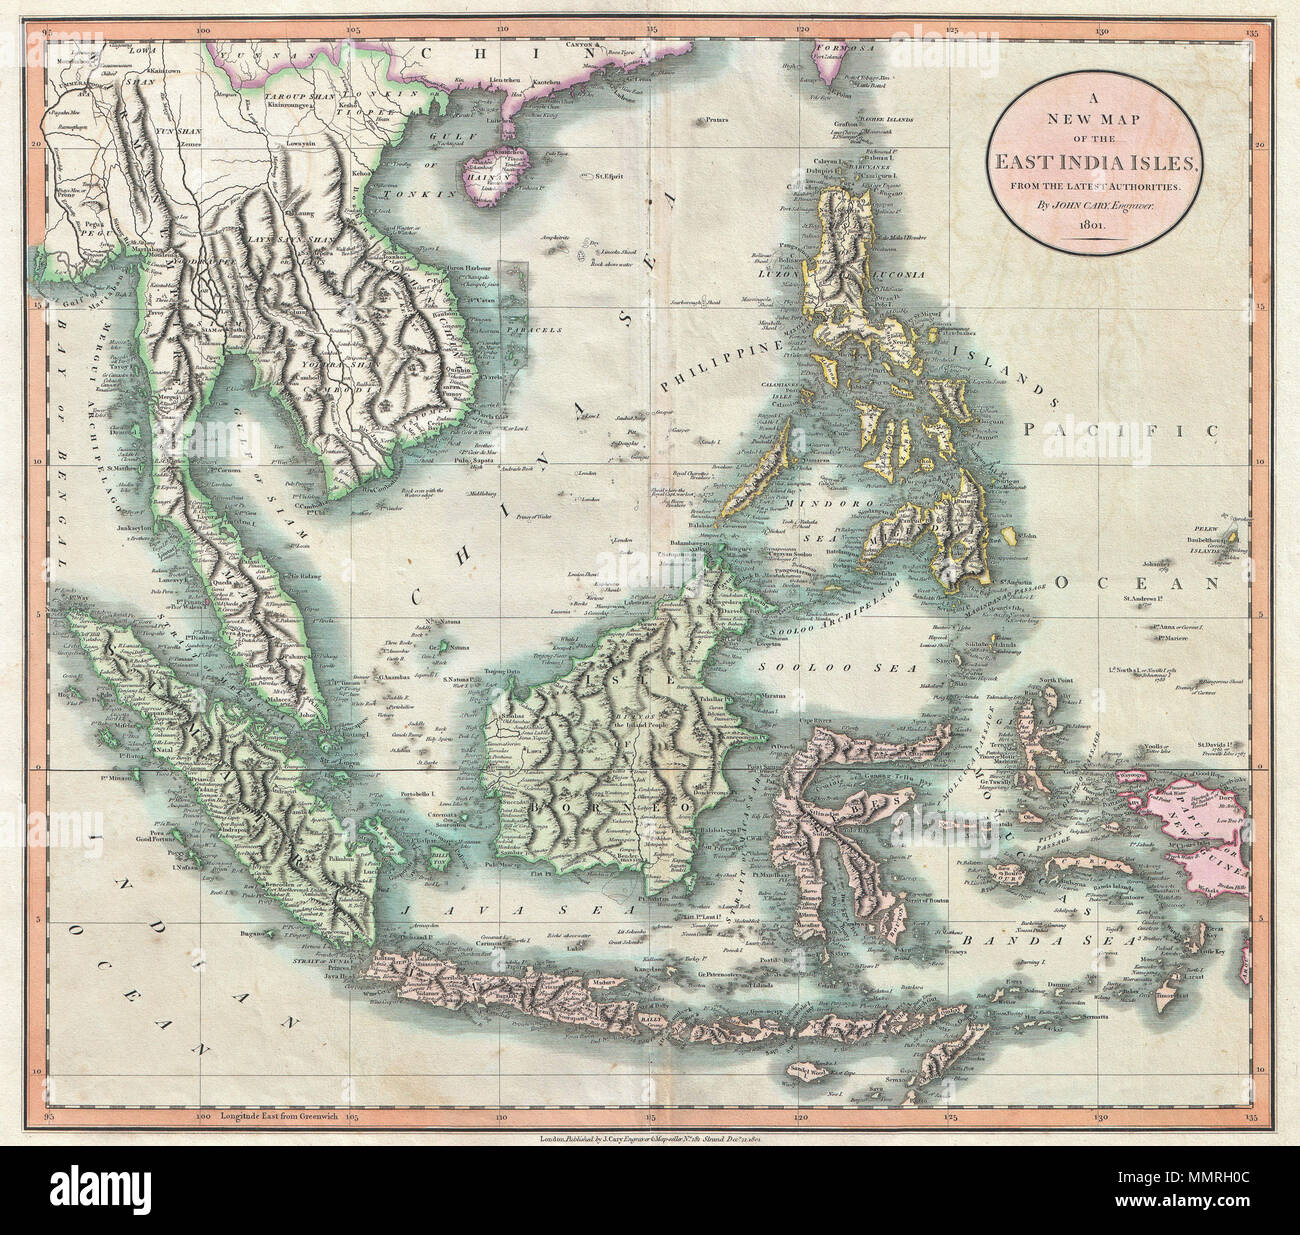 . English: An exceptionally beautiful example of John Cary’s important 1801 Map of the East Indies. Covers all of Southeast Asia and the Malay Peninsula, including Singapore, as well as the Philippines, Borneo, Sumatra, java, the Celebes, and parts of Papua New Guinea. One of the few maps of this region to label the volcanic island of Krakatoa between Java and Sumatra, which famously erupted, obliterating the entire island in 1883. Notes the Straits of Singapore at the southern tip of the Malay Peninsula. Offers wonderful detail regarding the mountain ranges of the region. Also shows some off  Stock Photo